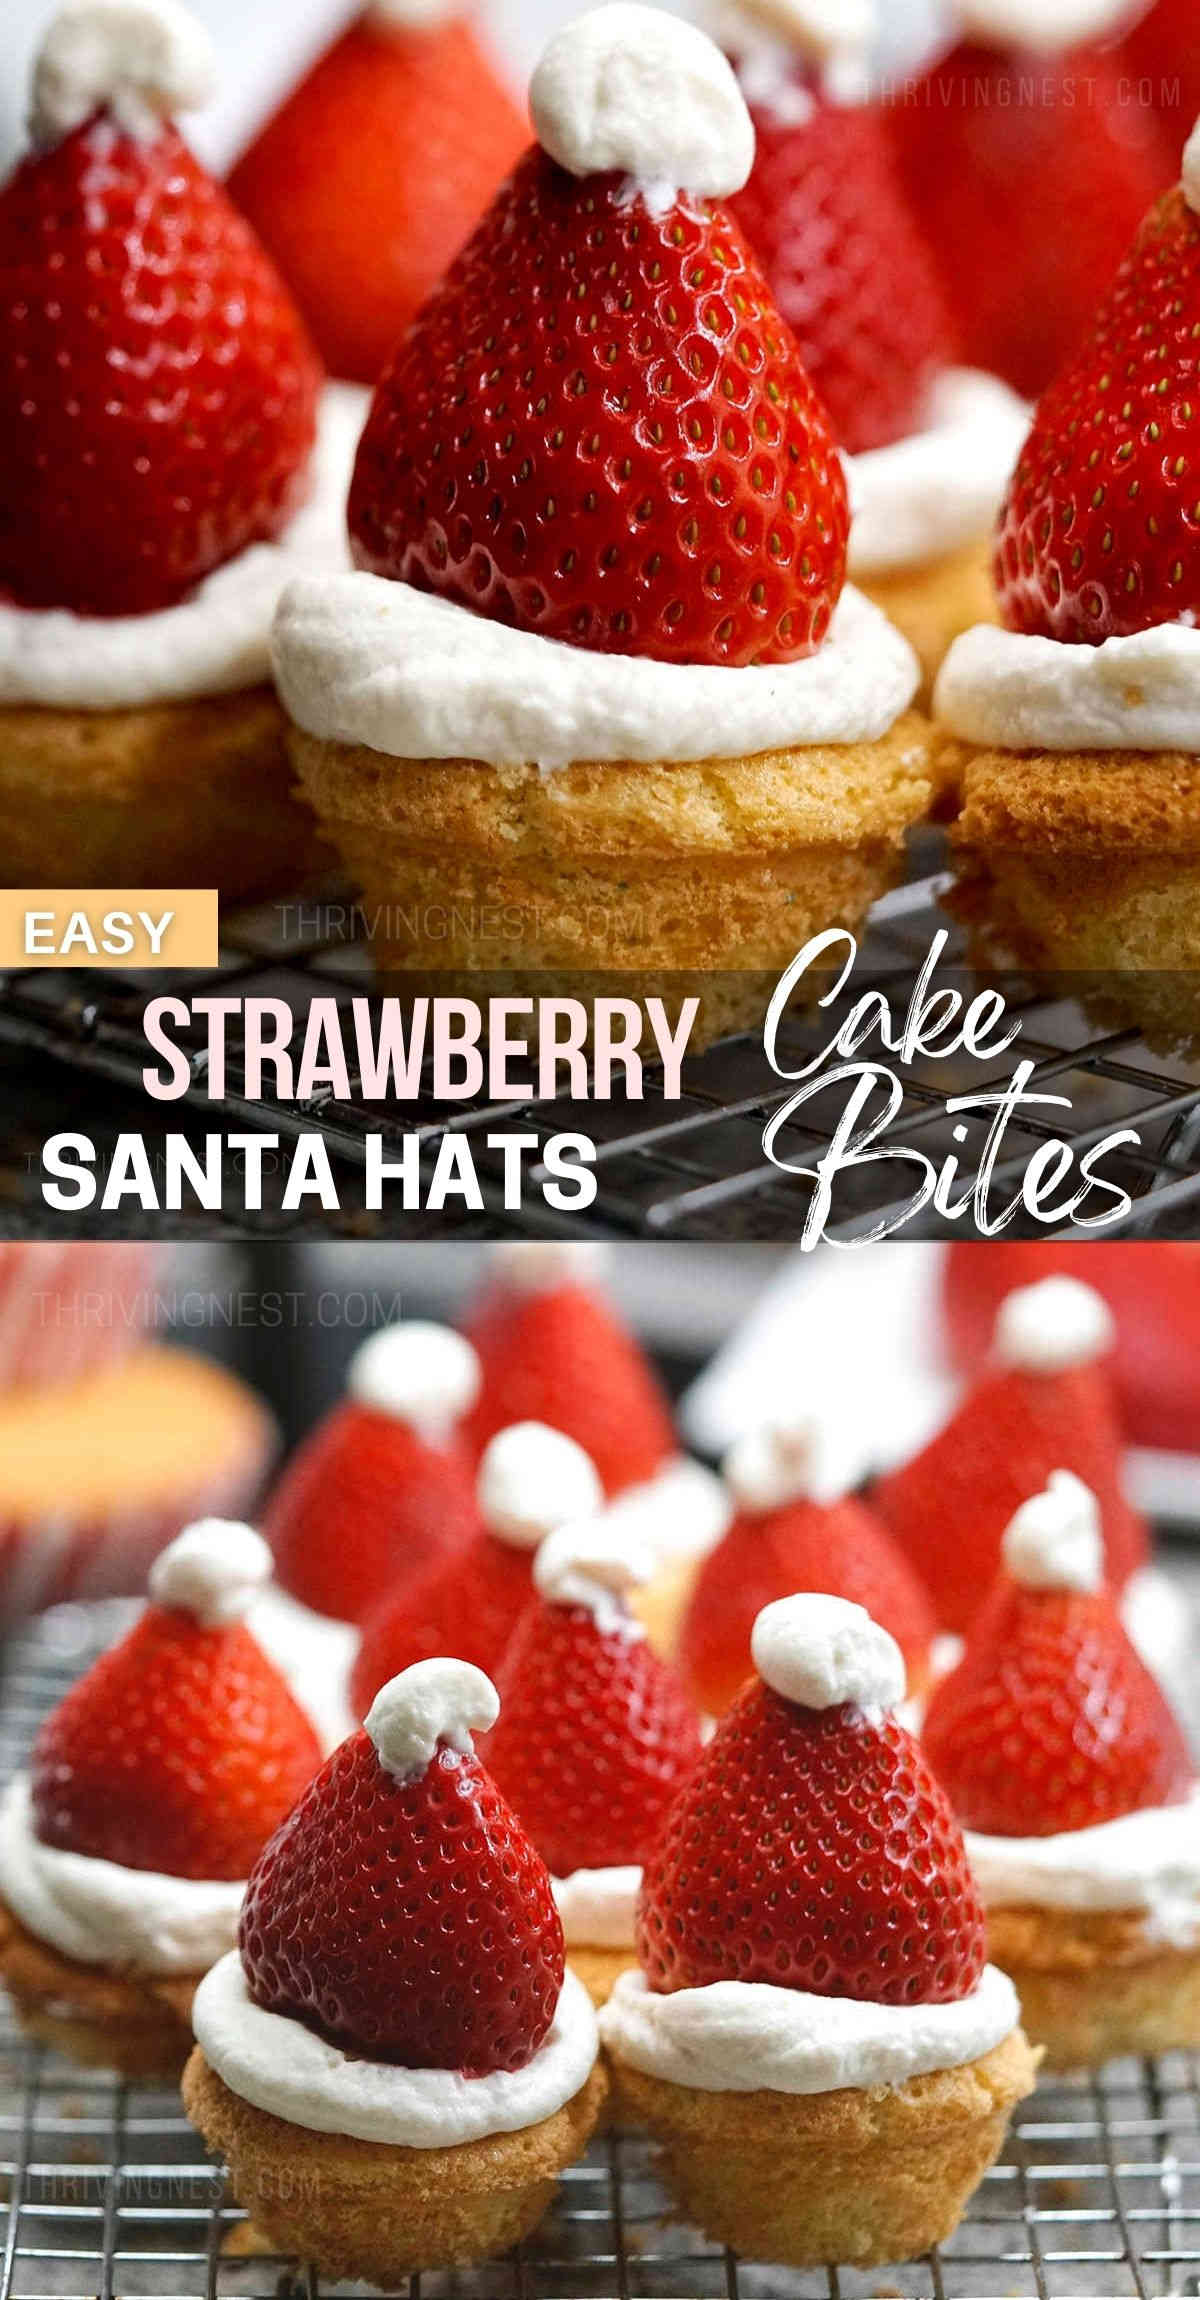 These cute mini strawberry Santa hats have a light and airy spongy cake base (bite size) covered by whipped cream and finished with fresh strawberries. Making this strawberry Santa hat dessert recipe is such a fun Christmas treat. The kids and little toddlers will just love to participate. #christmas #dessert #santahats #recipe #strawberry #whippedcream